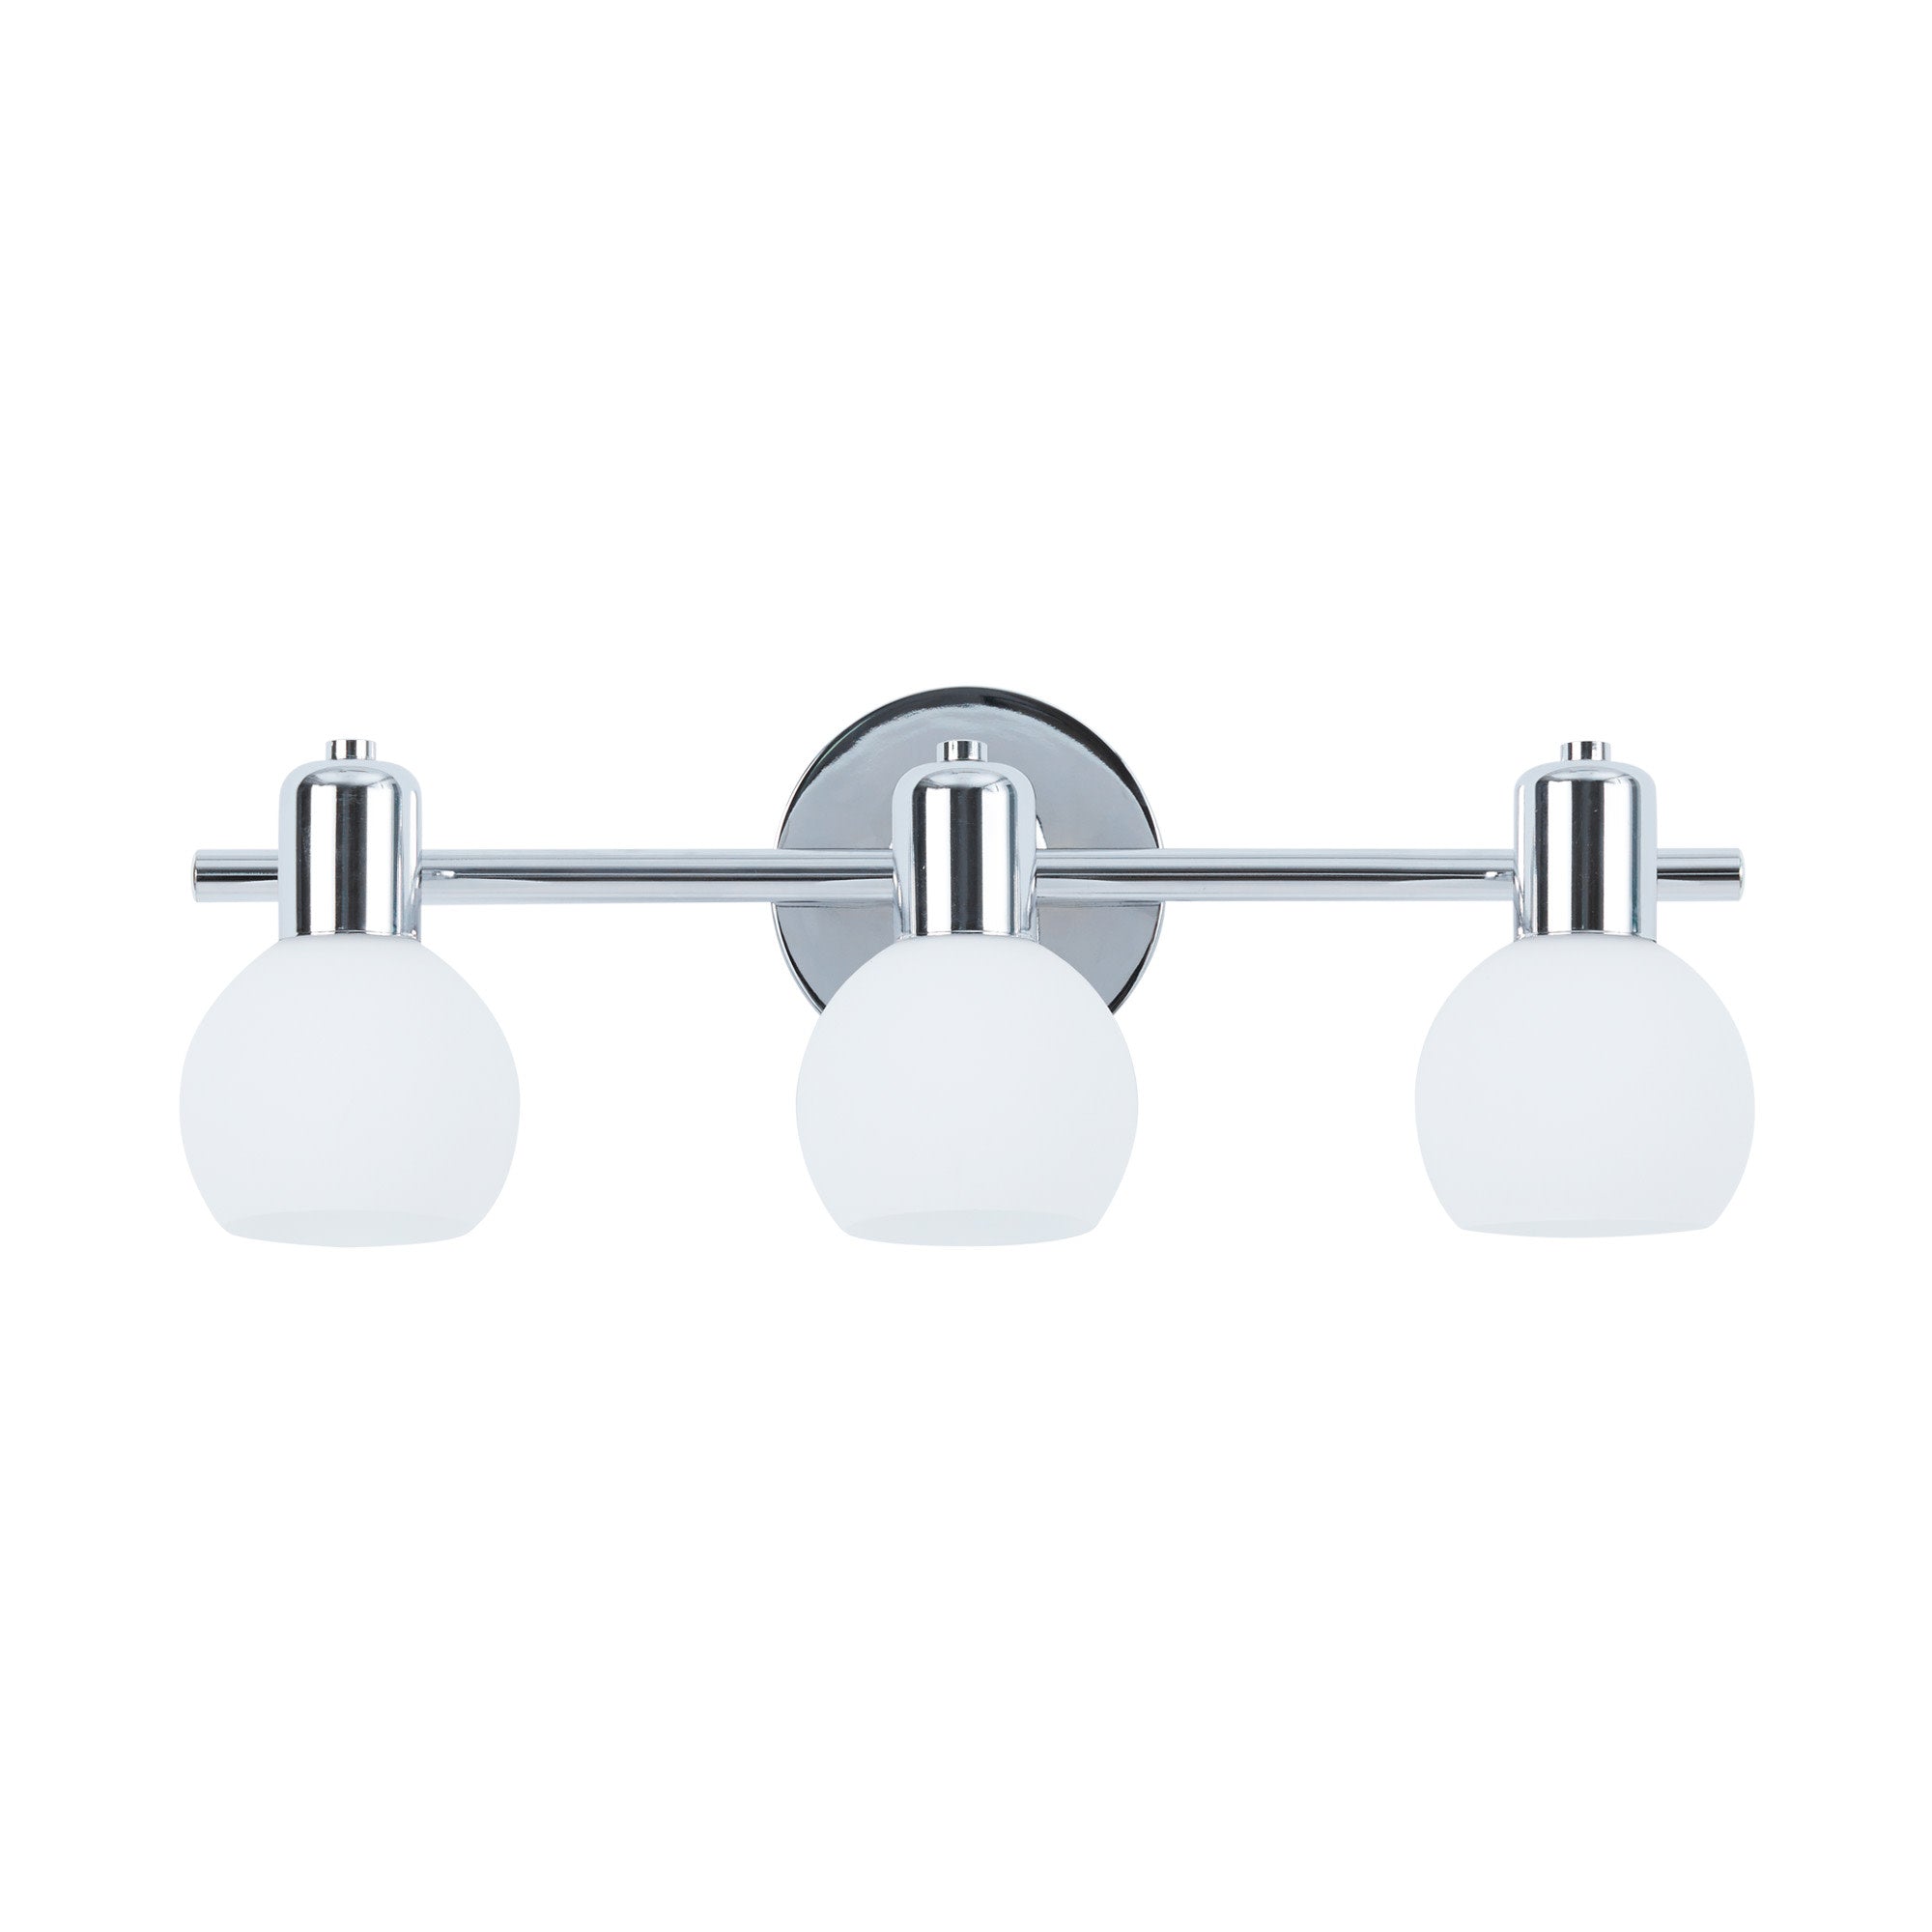 Teamson Home - 3 Light Vanity Light Frosted Glass Globe Shade